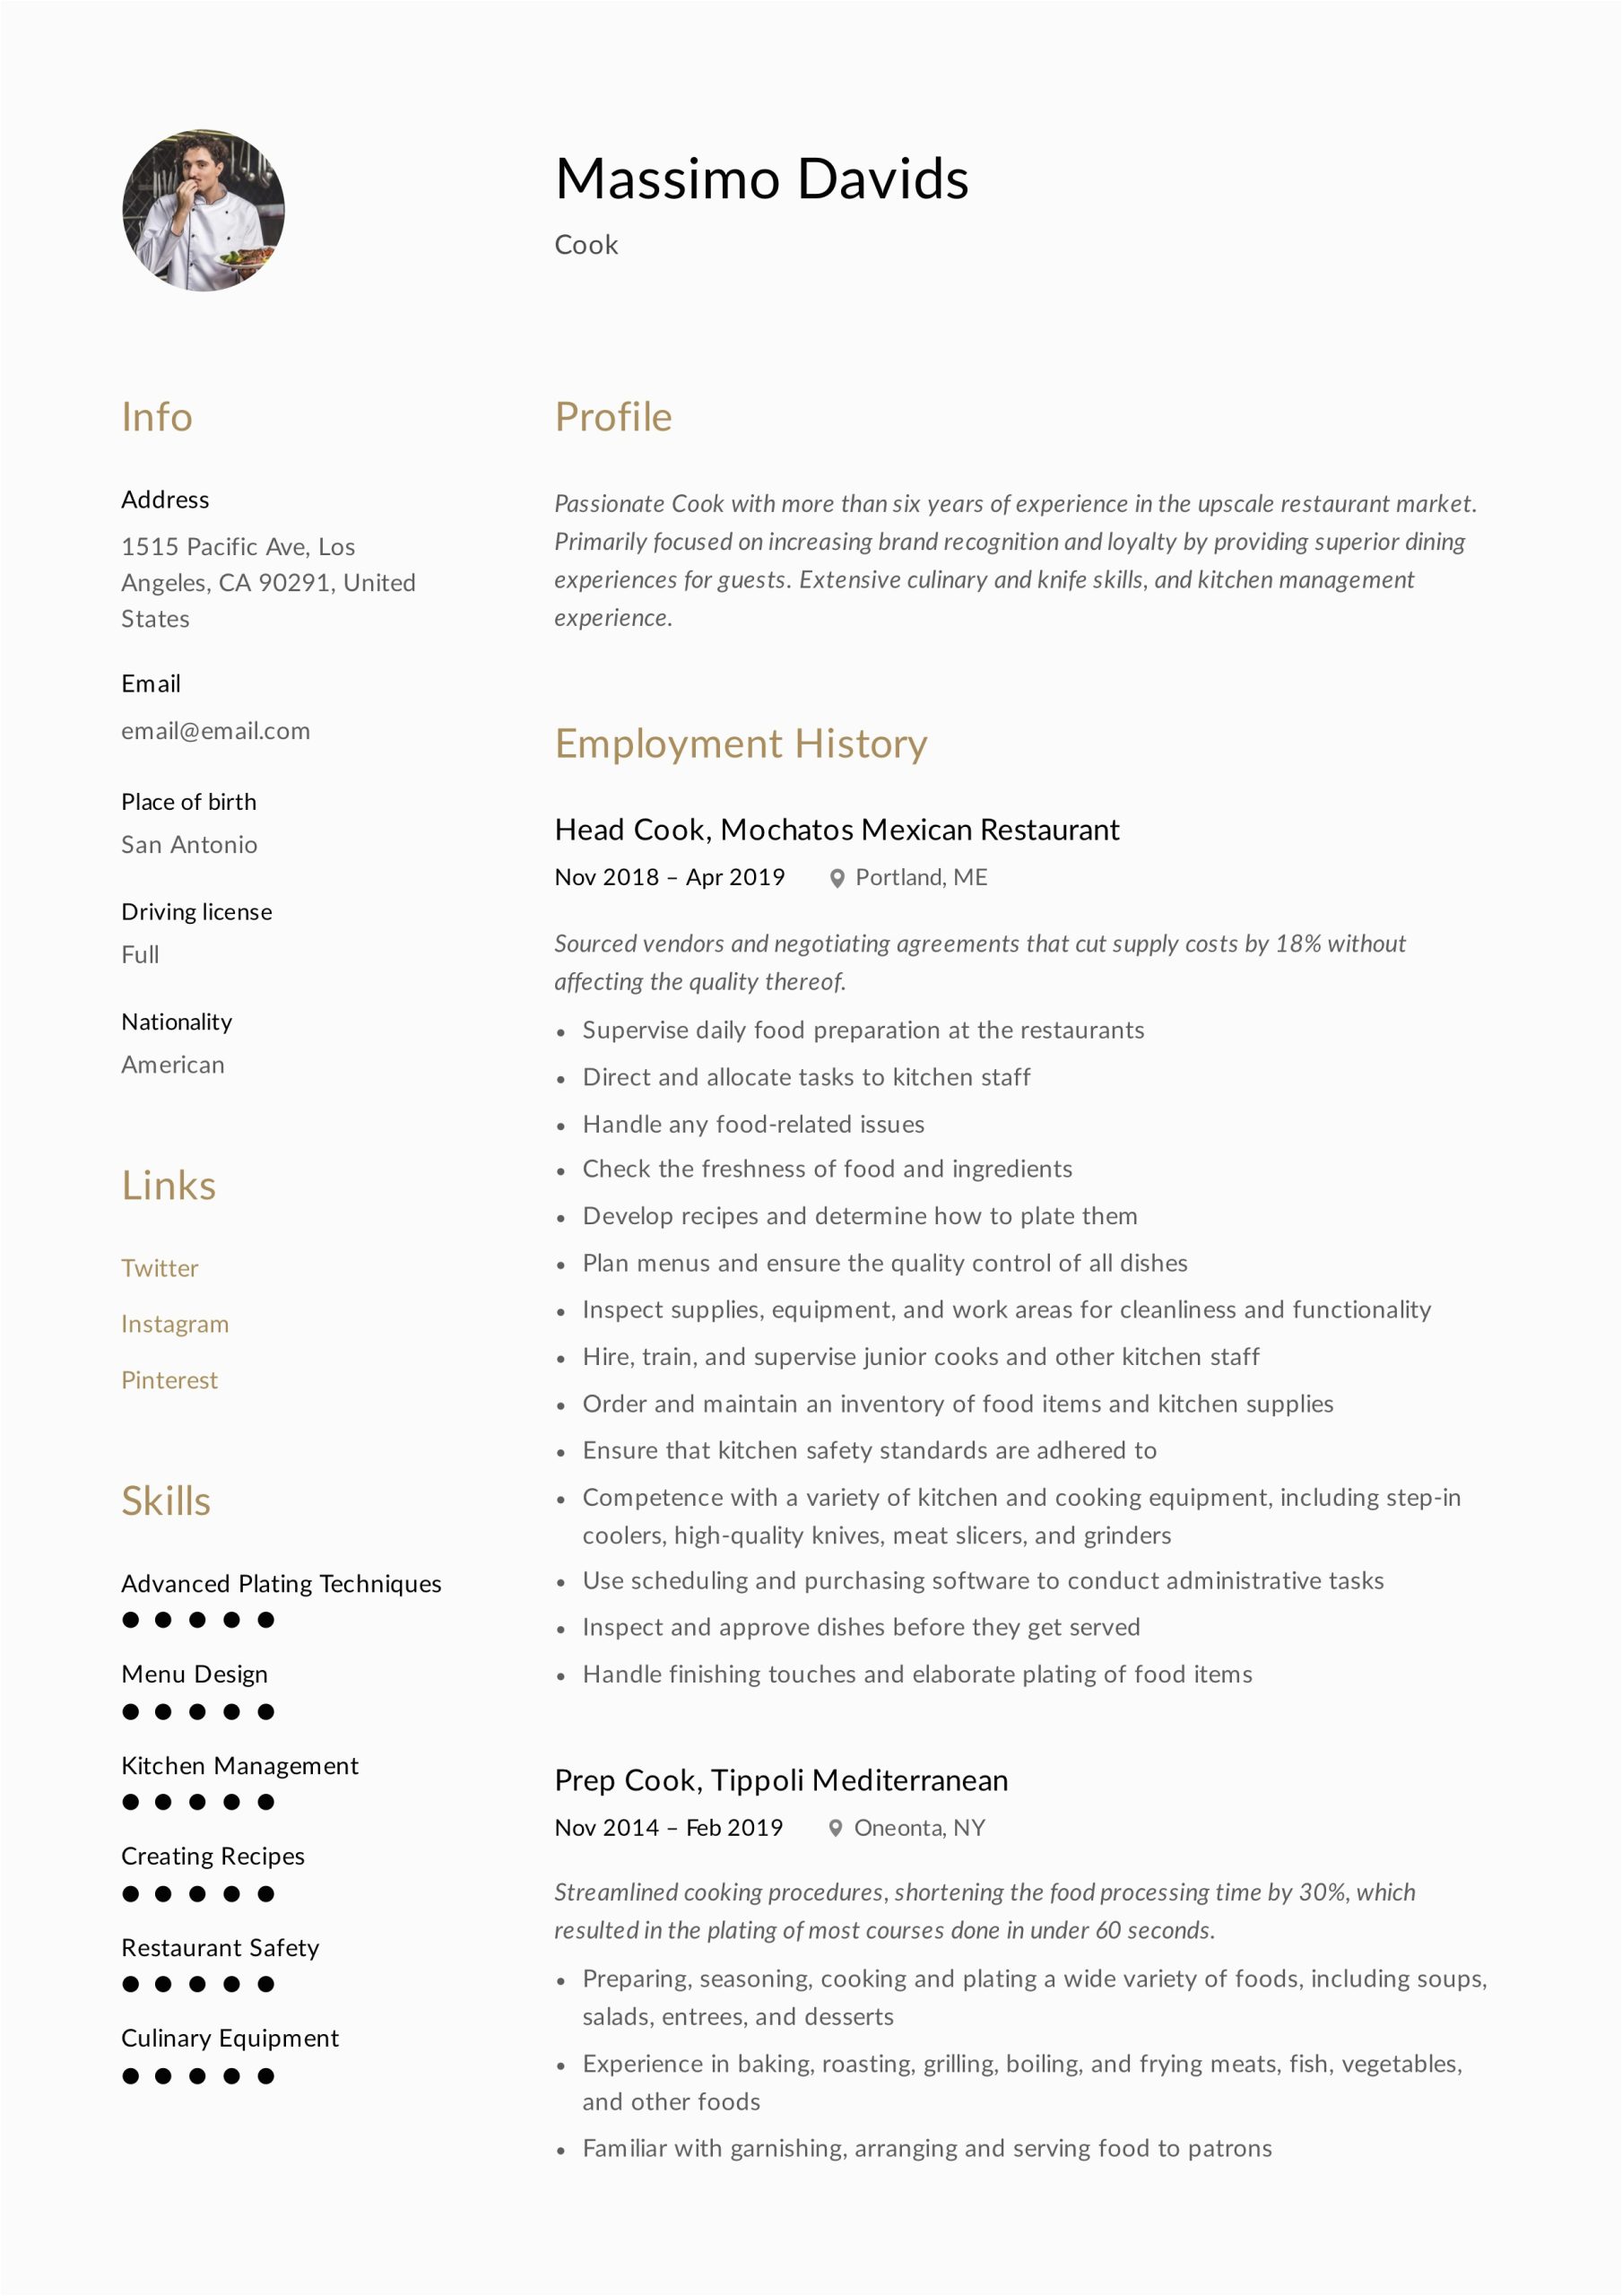 Sample Resume Profile for A Cook Cook Resume Writing Guide 12 Resume Templates